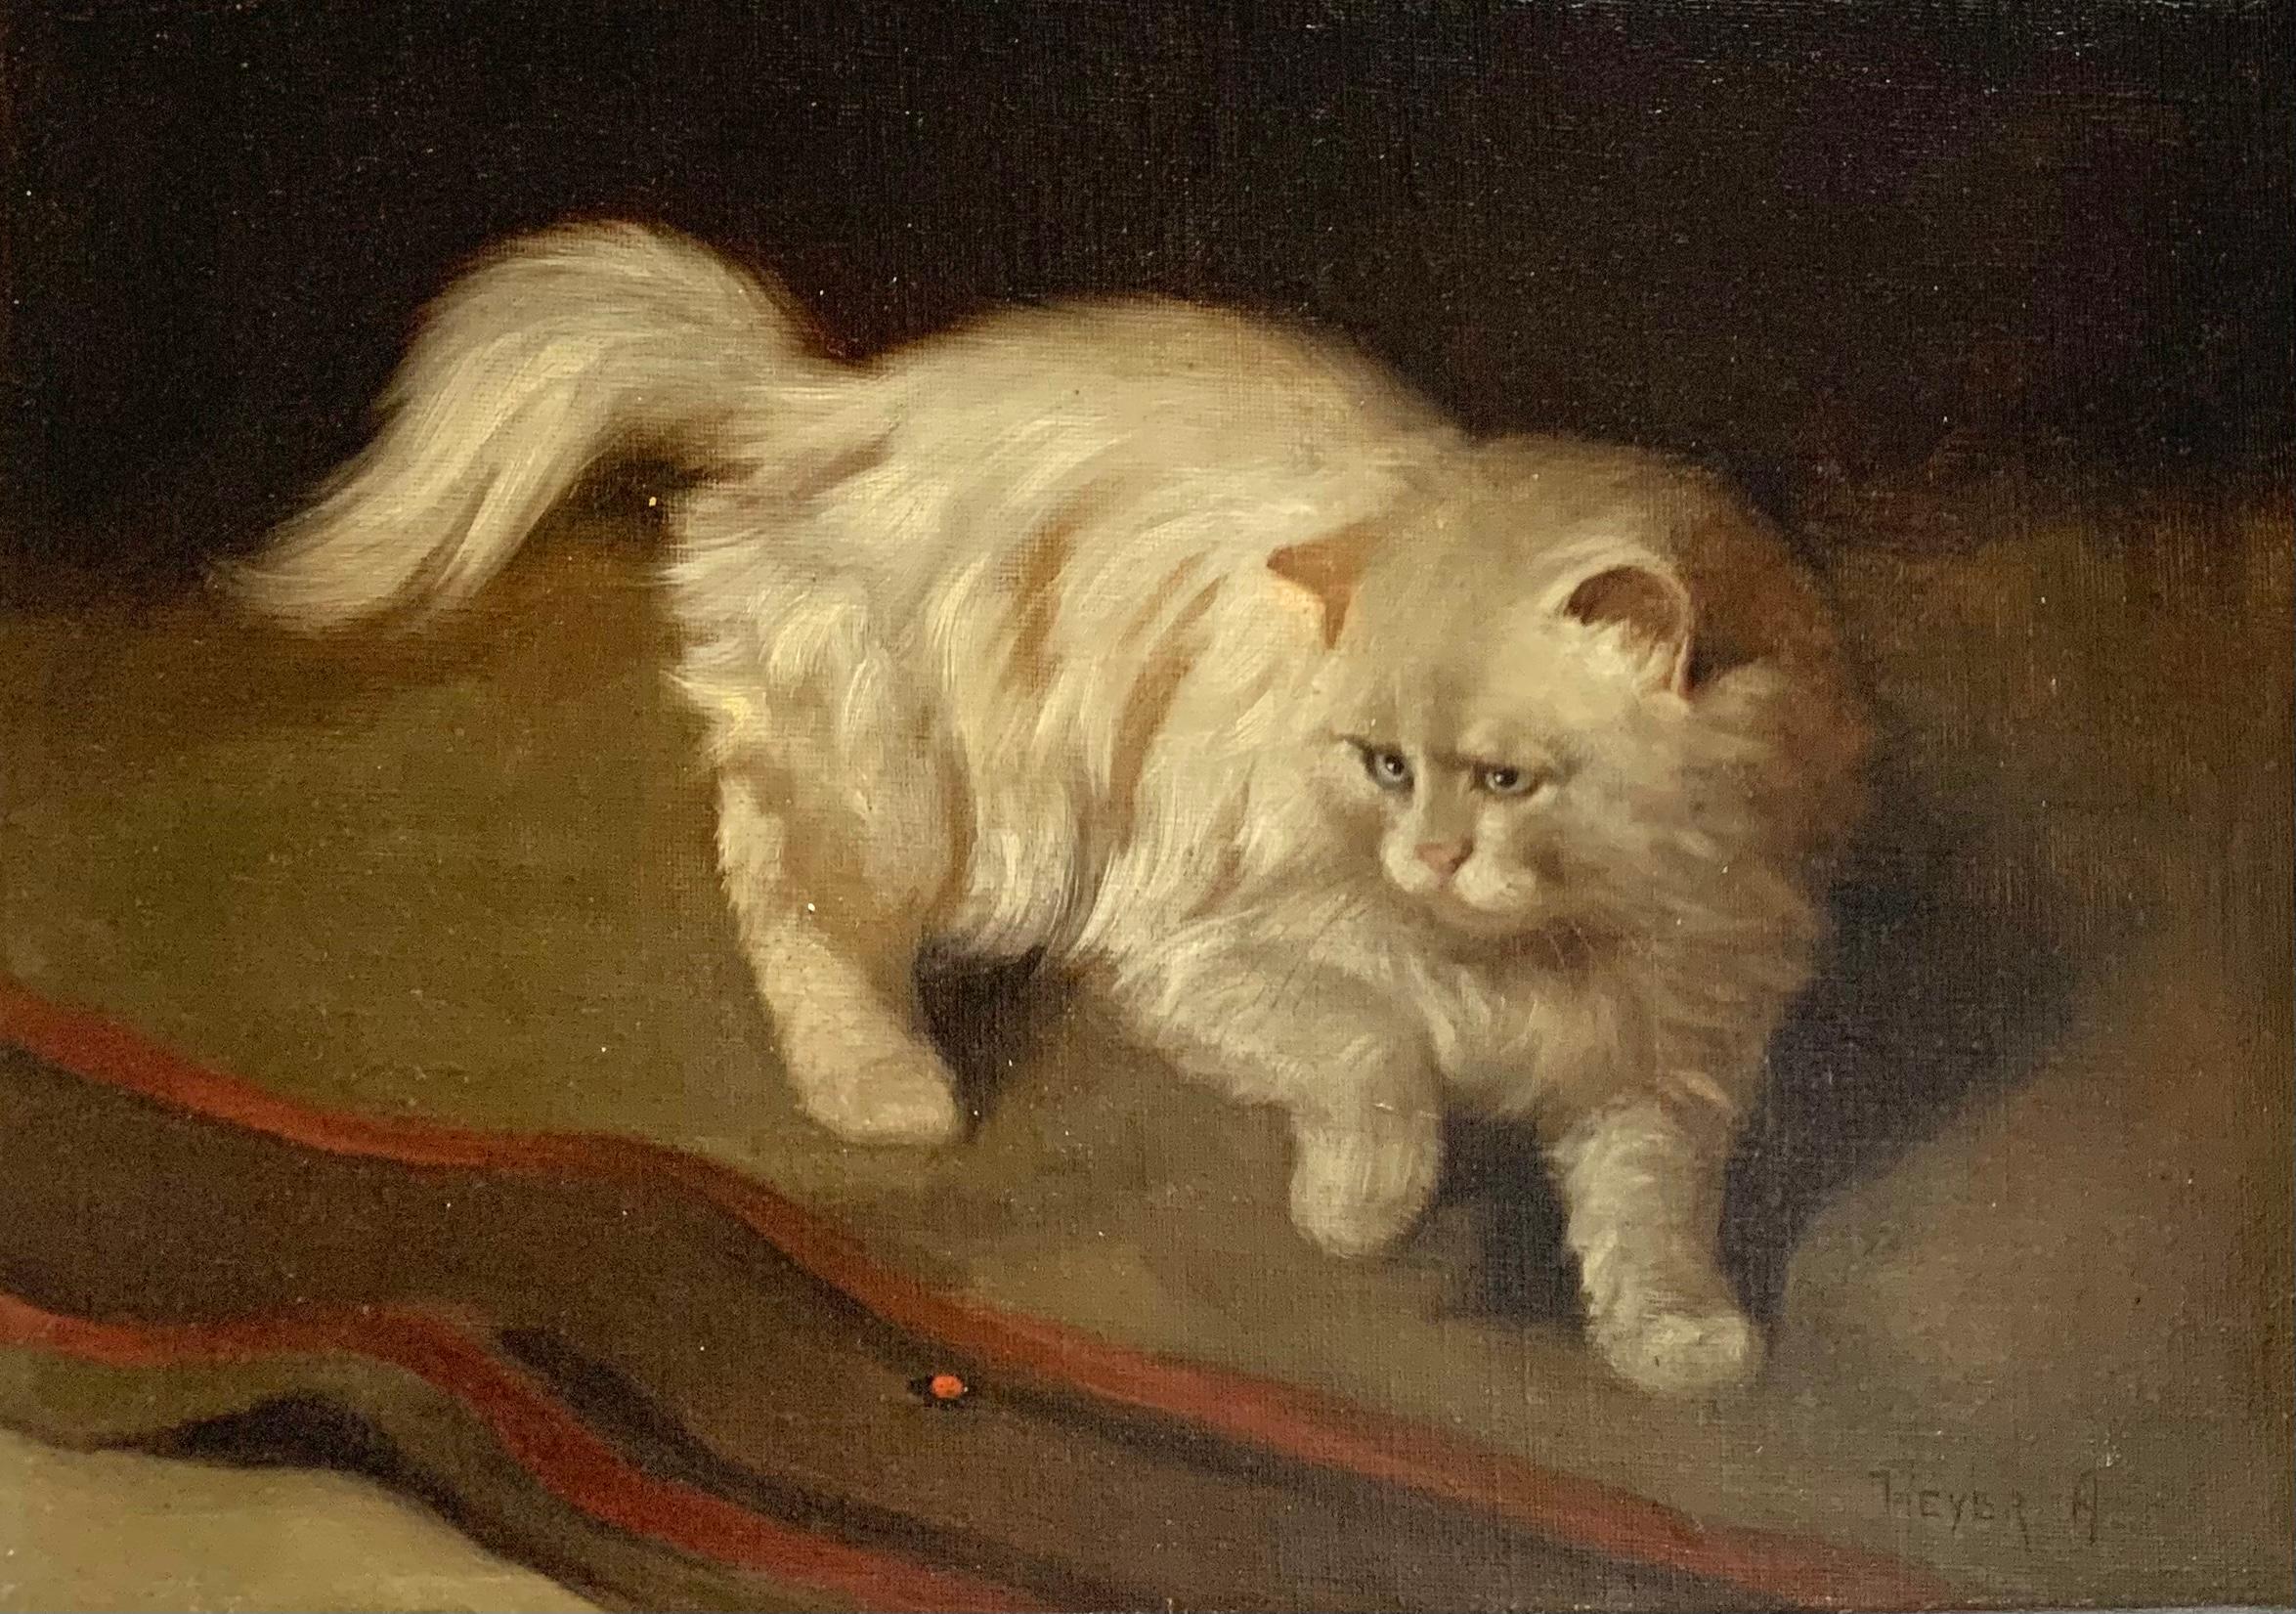 Arthur Heyer Animal Painting - White Fluffy Cat With One Raised Paw Stalking a Bug on the Floor